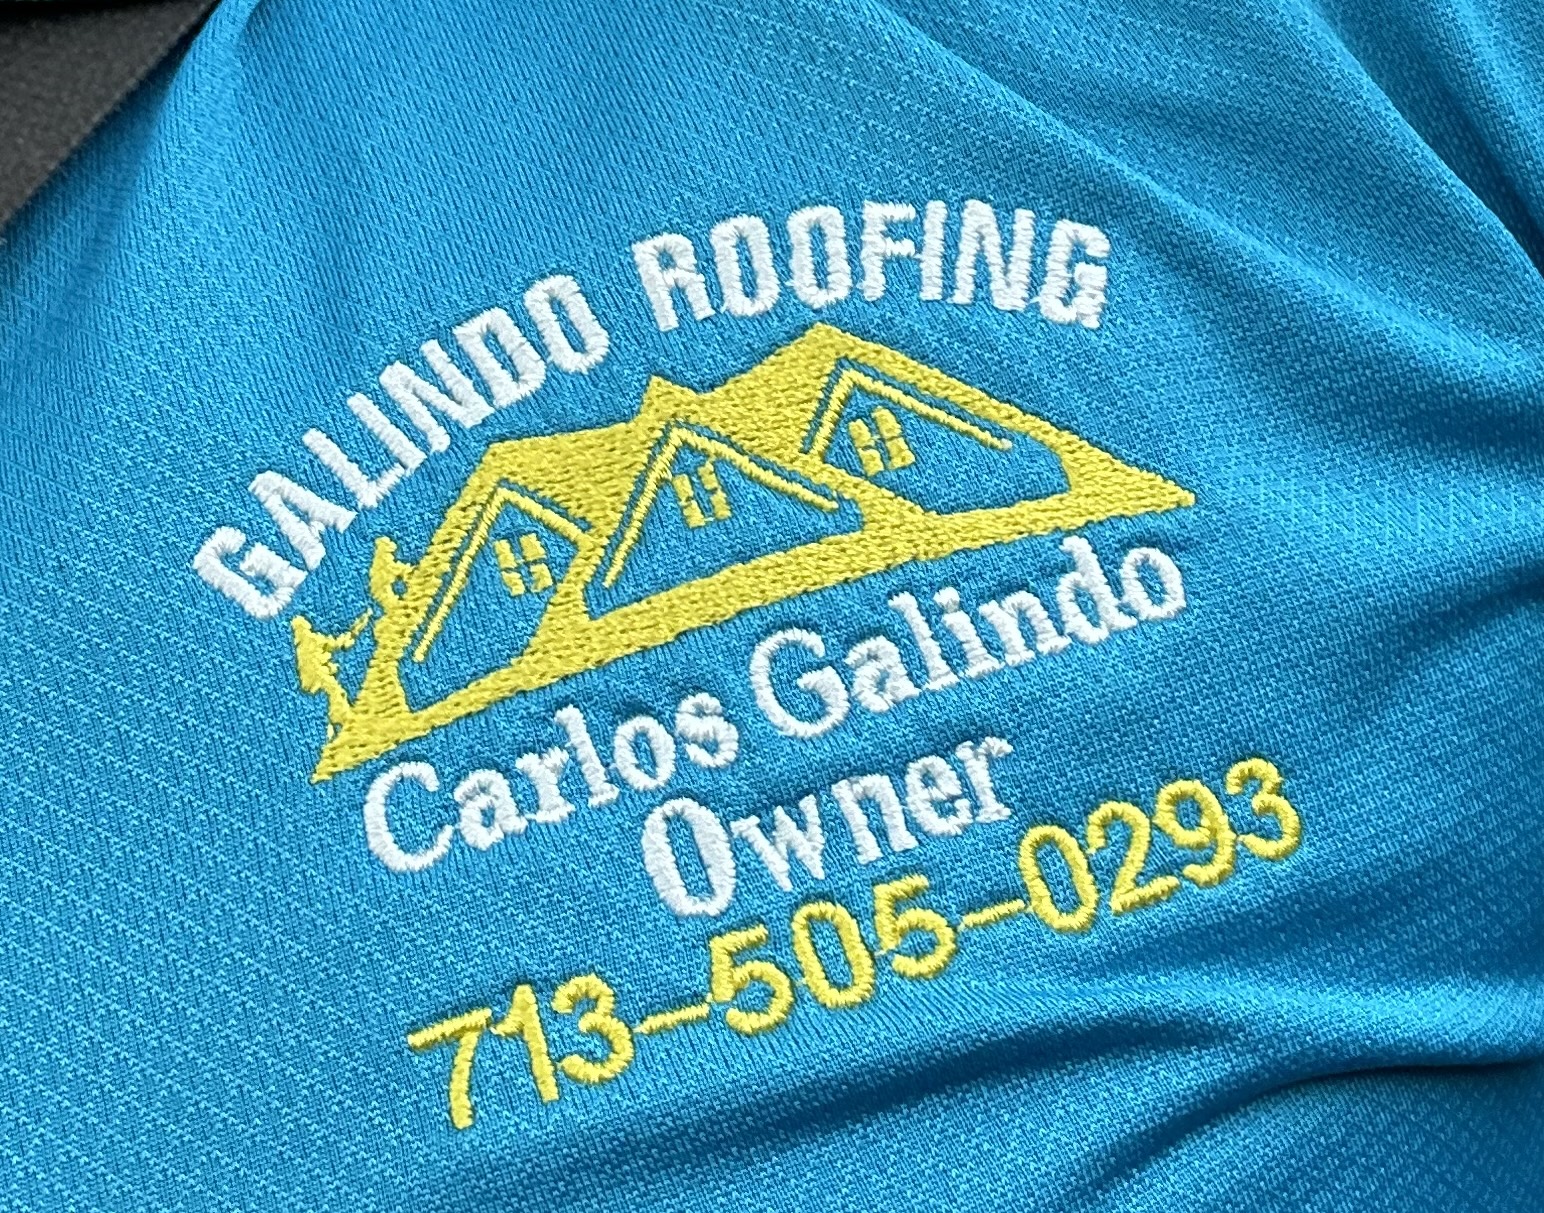 Galindo Roofing and Remodeling